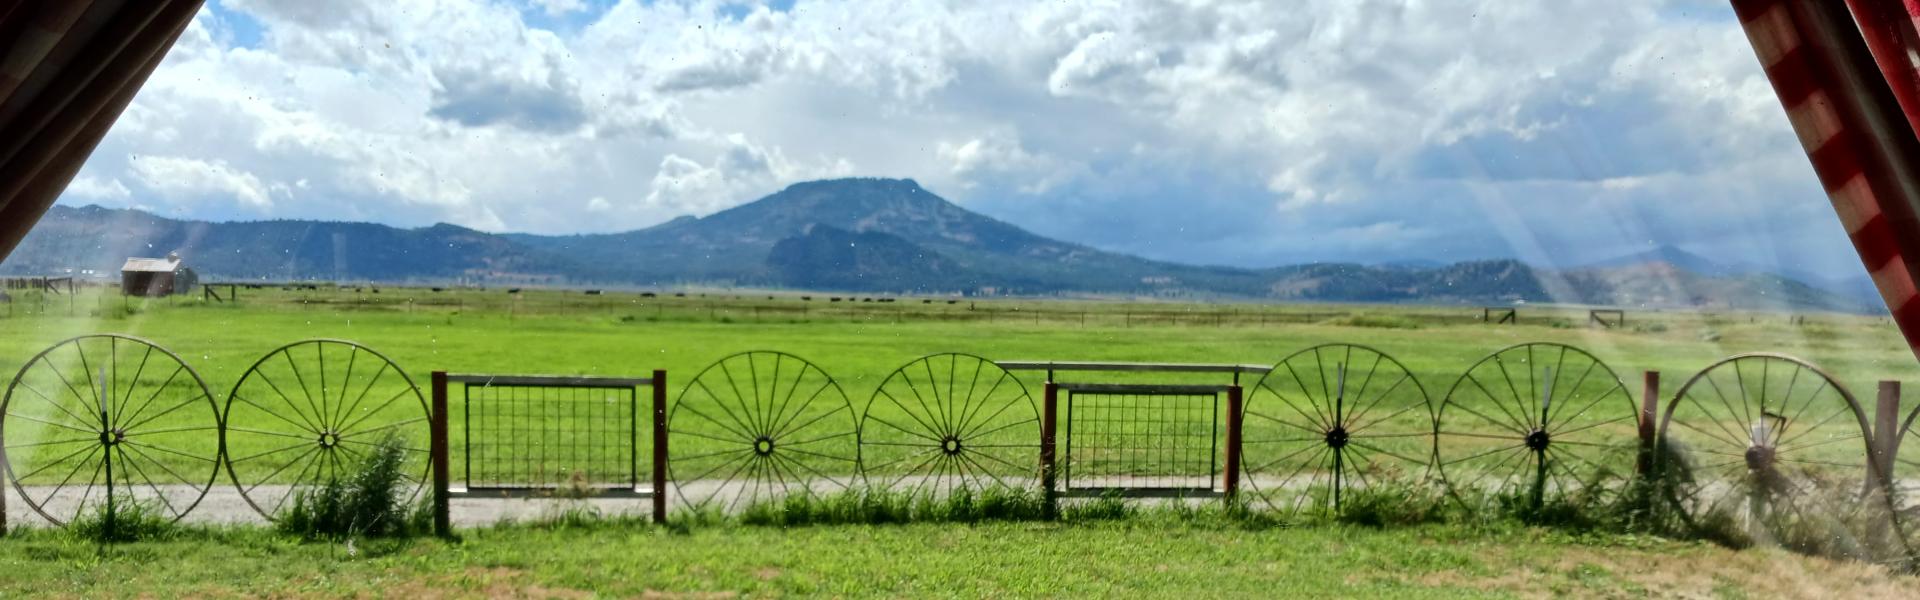 The view from a Sierra Valley ranch